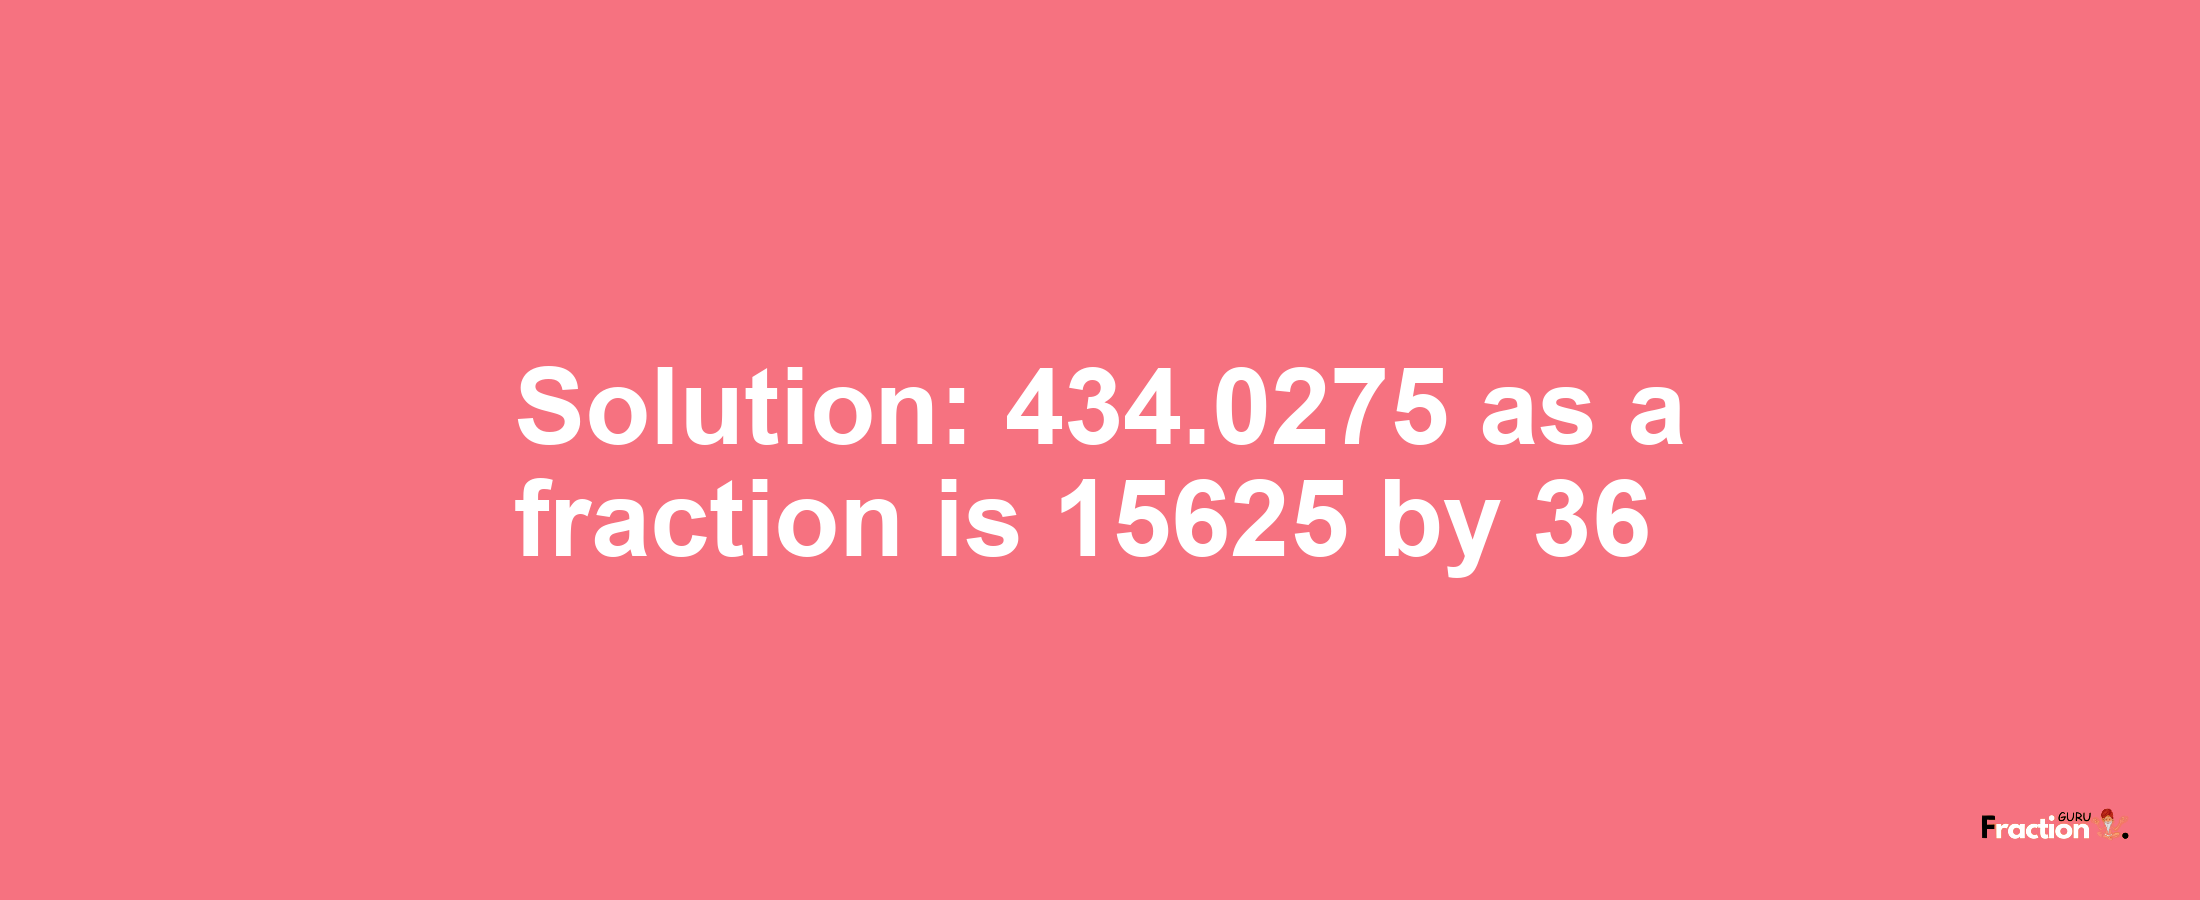 Solution:434.0275 as a fraction is 15625/36